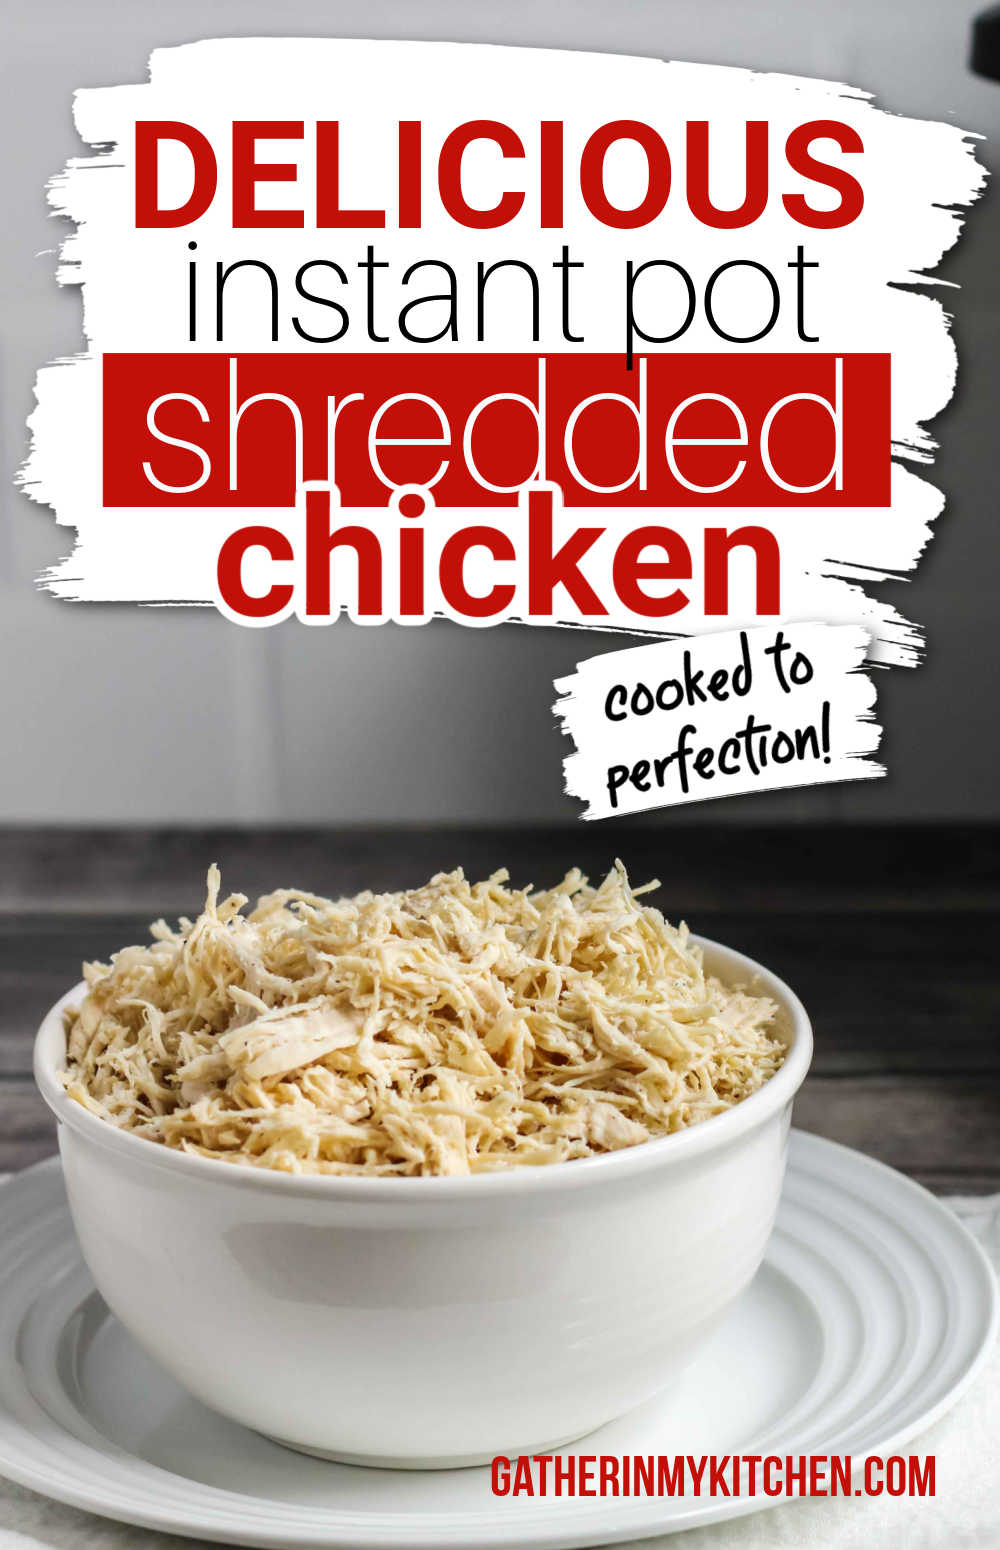 Pin image: top says "delicious Instant Pot shredded chicken: cooked to perfection" with a pic of a bowl with shredded chicken below.